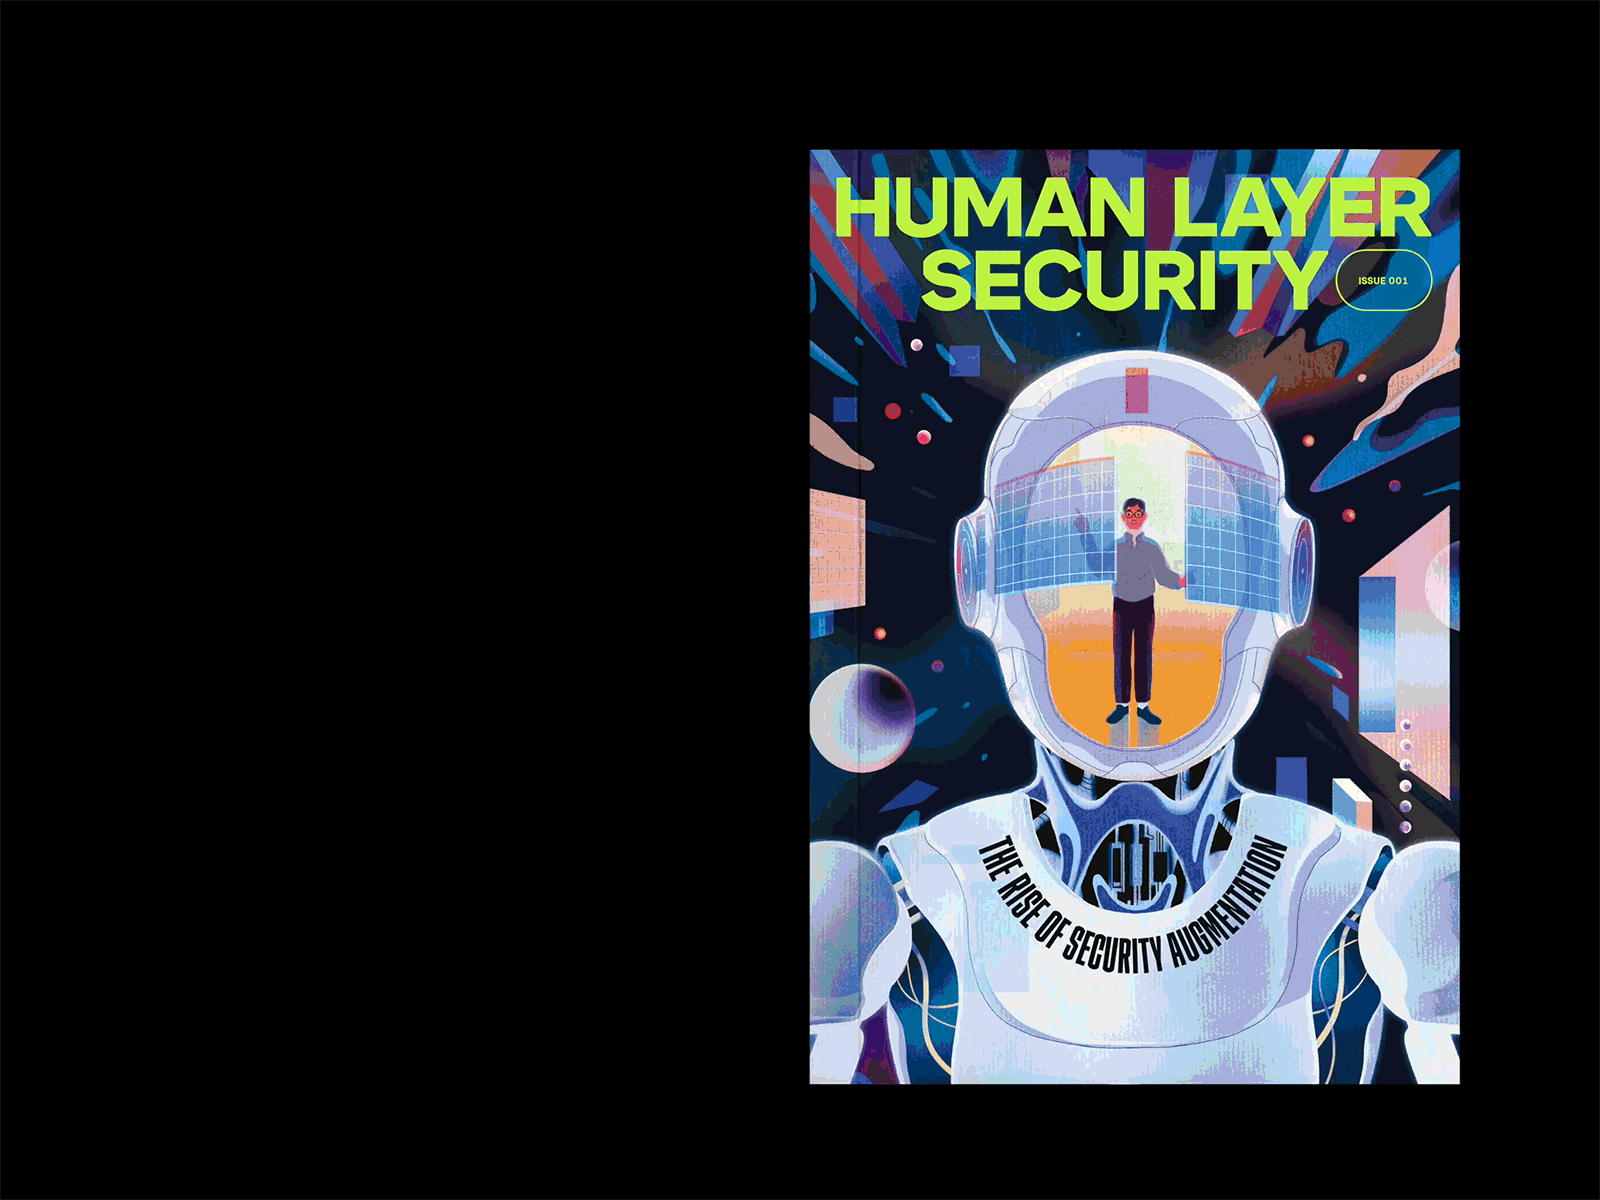 Human Layer Security Magazine — Page Flip cybersecurity identity magazine print spreads startup